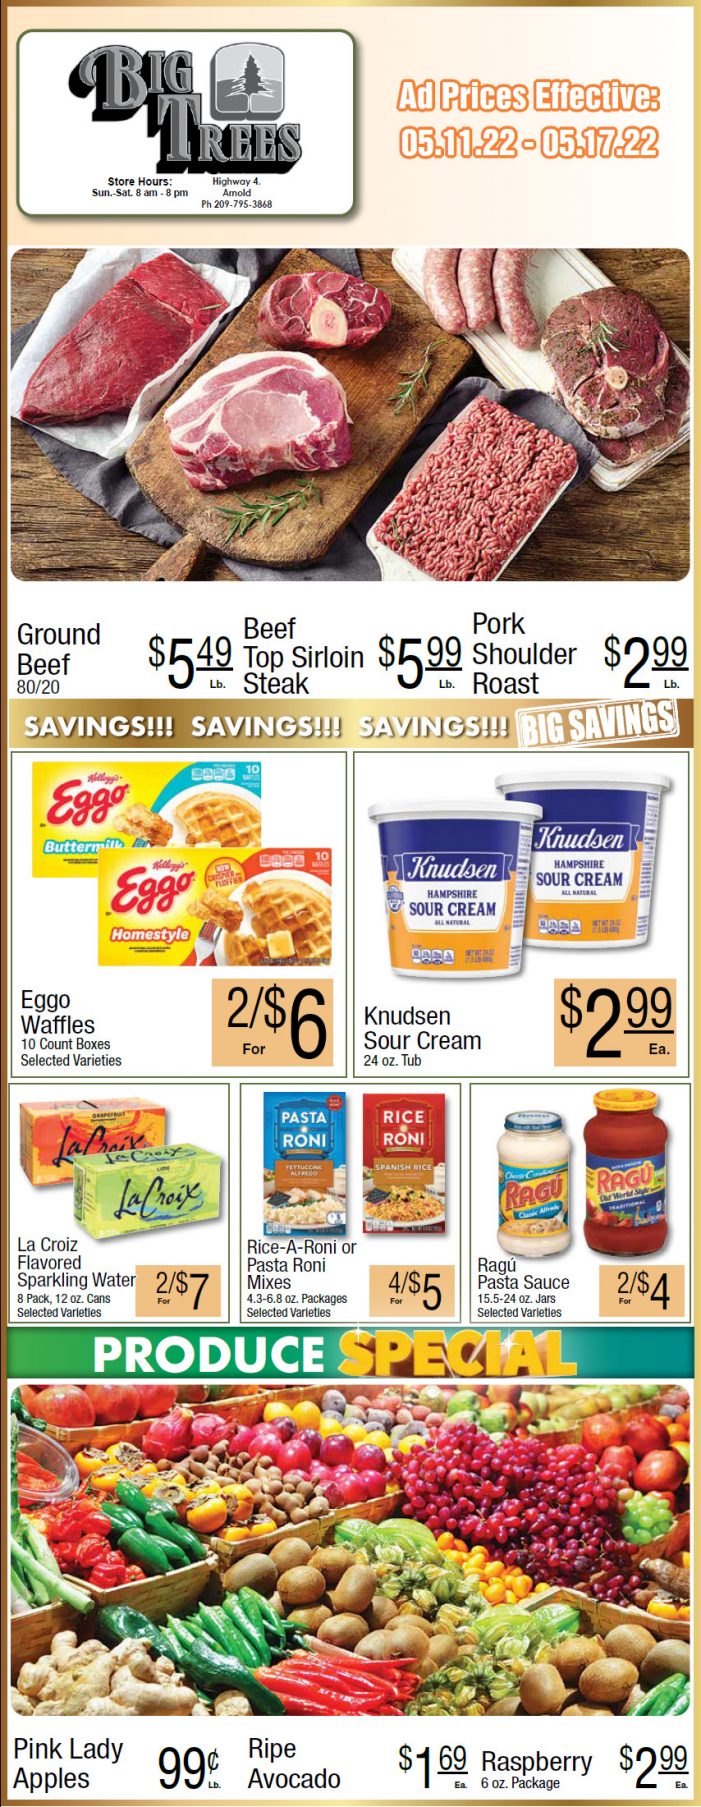 Big Trees Market Weekly Ad & Grocery Specials May 11th Through May 17th! Shop Local & Save!